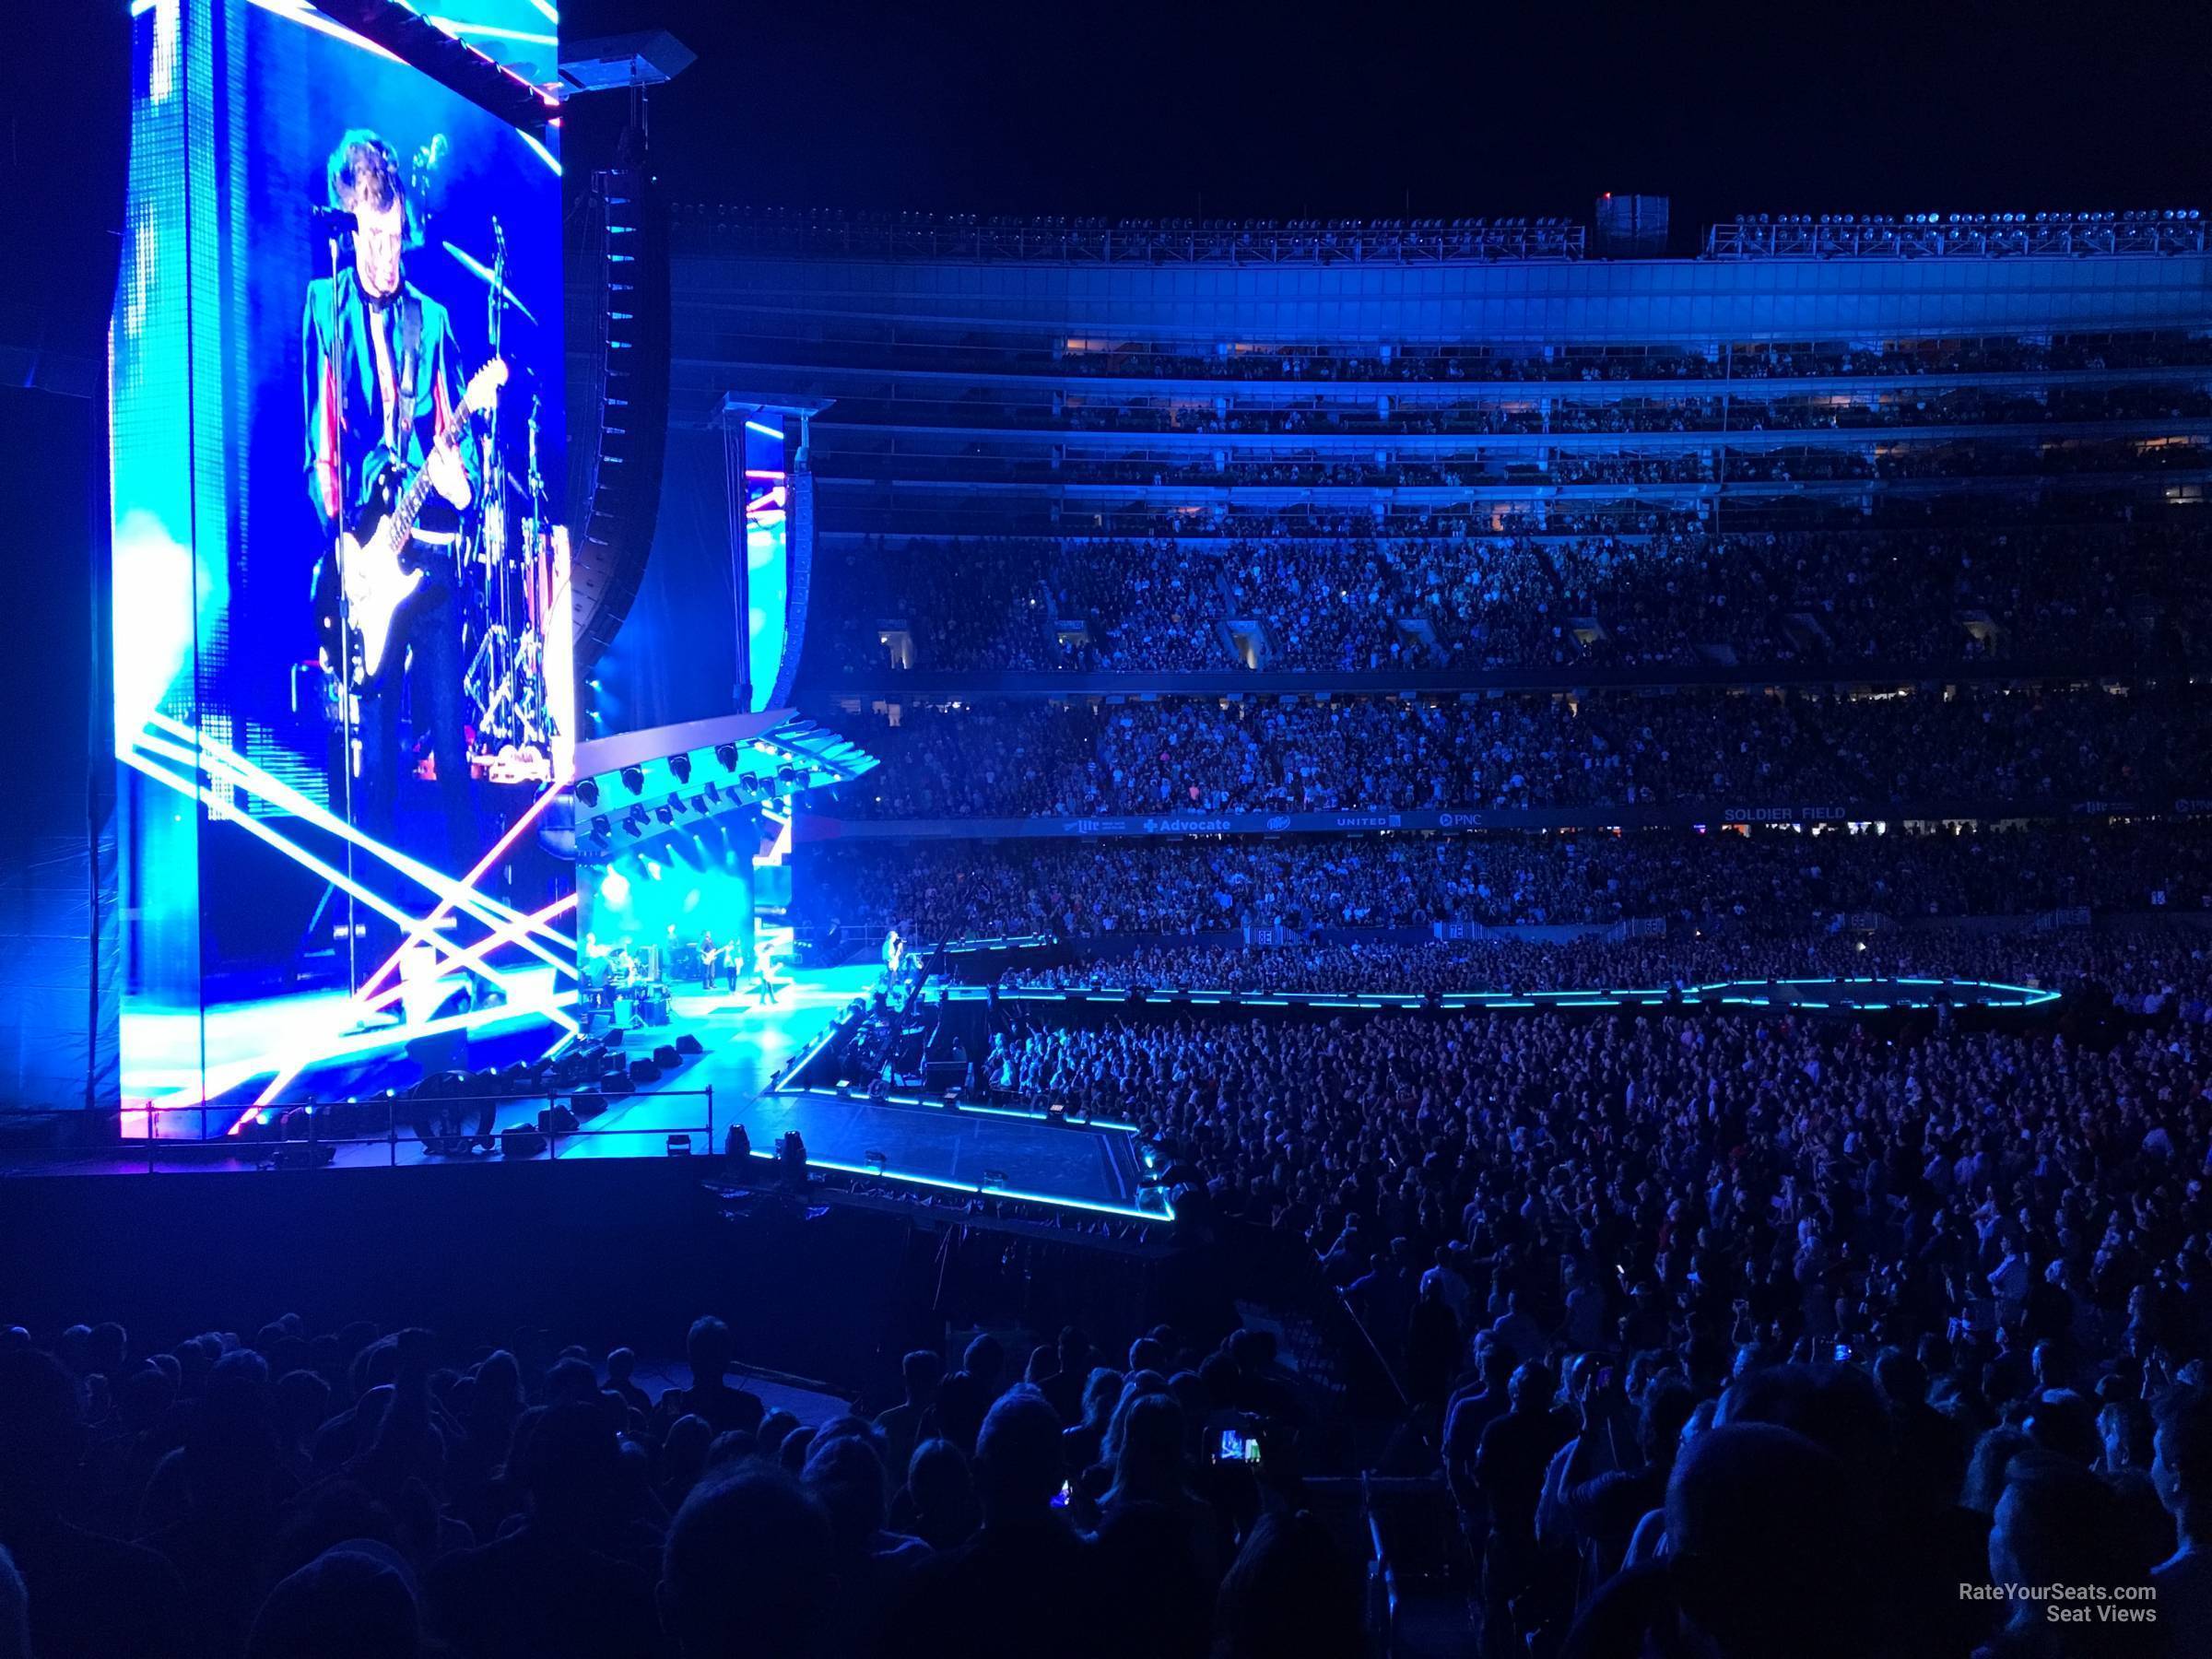 section 142, row 19 seat view  for concert - soldier field